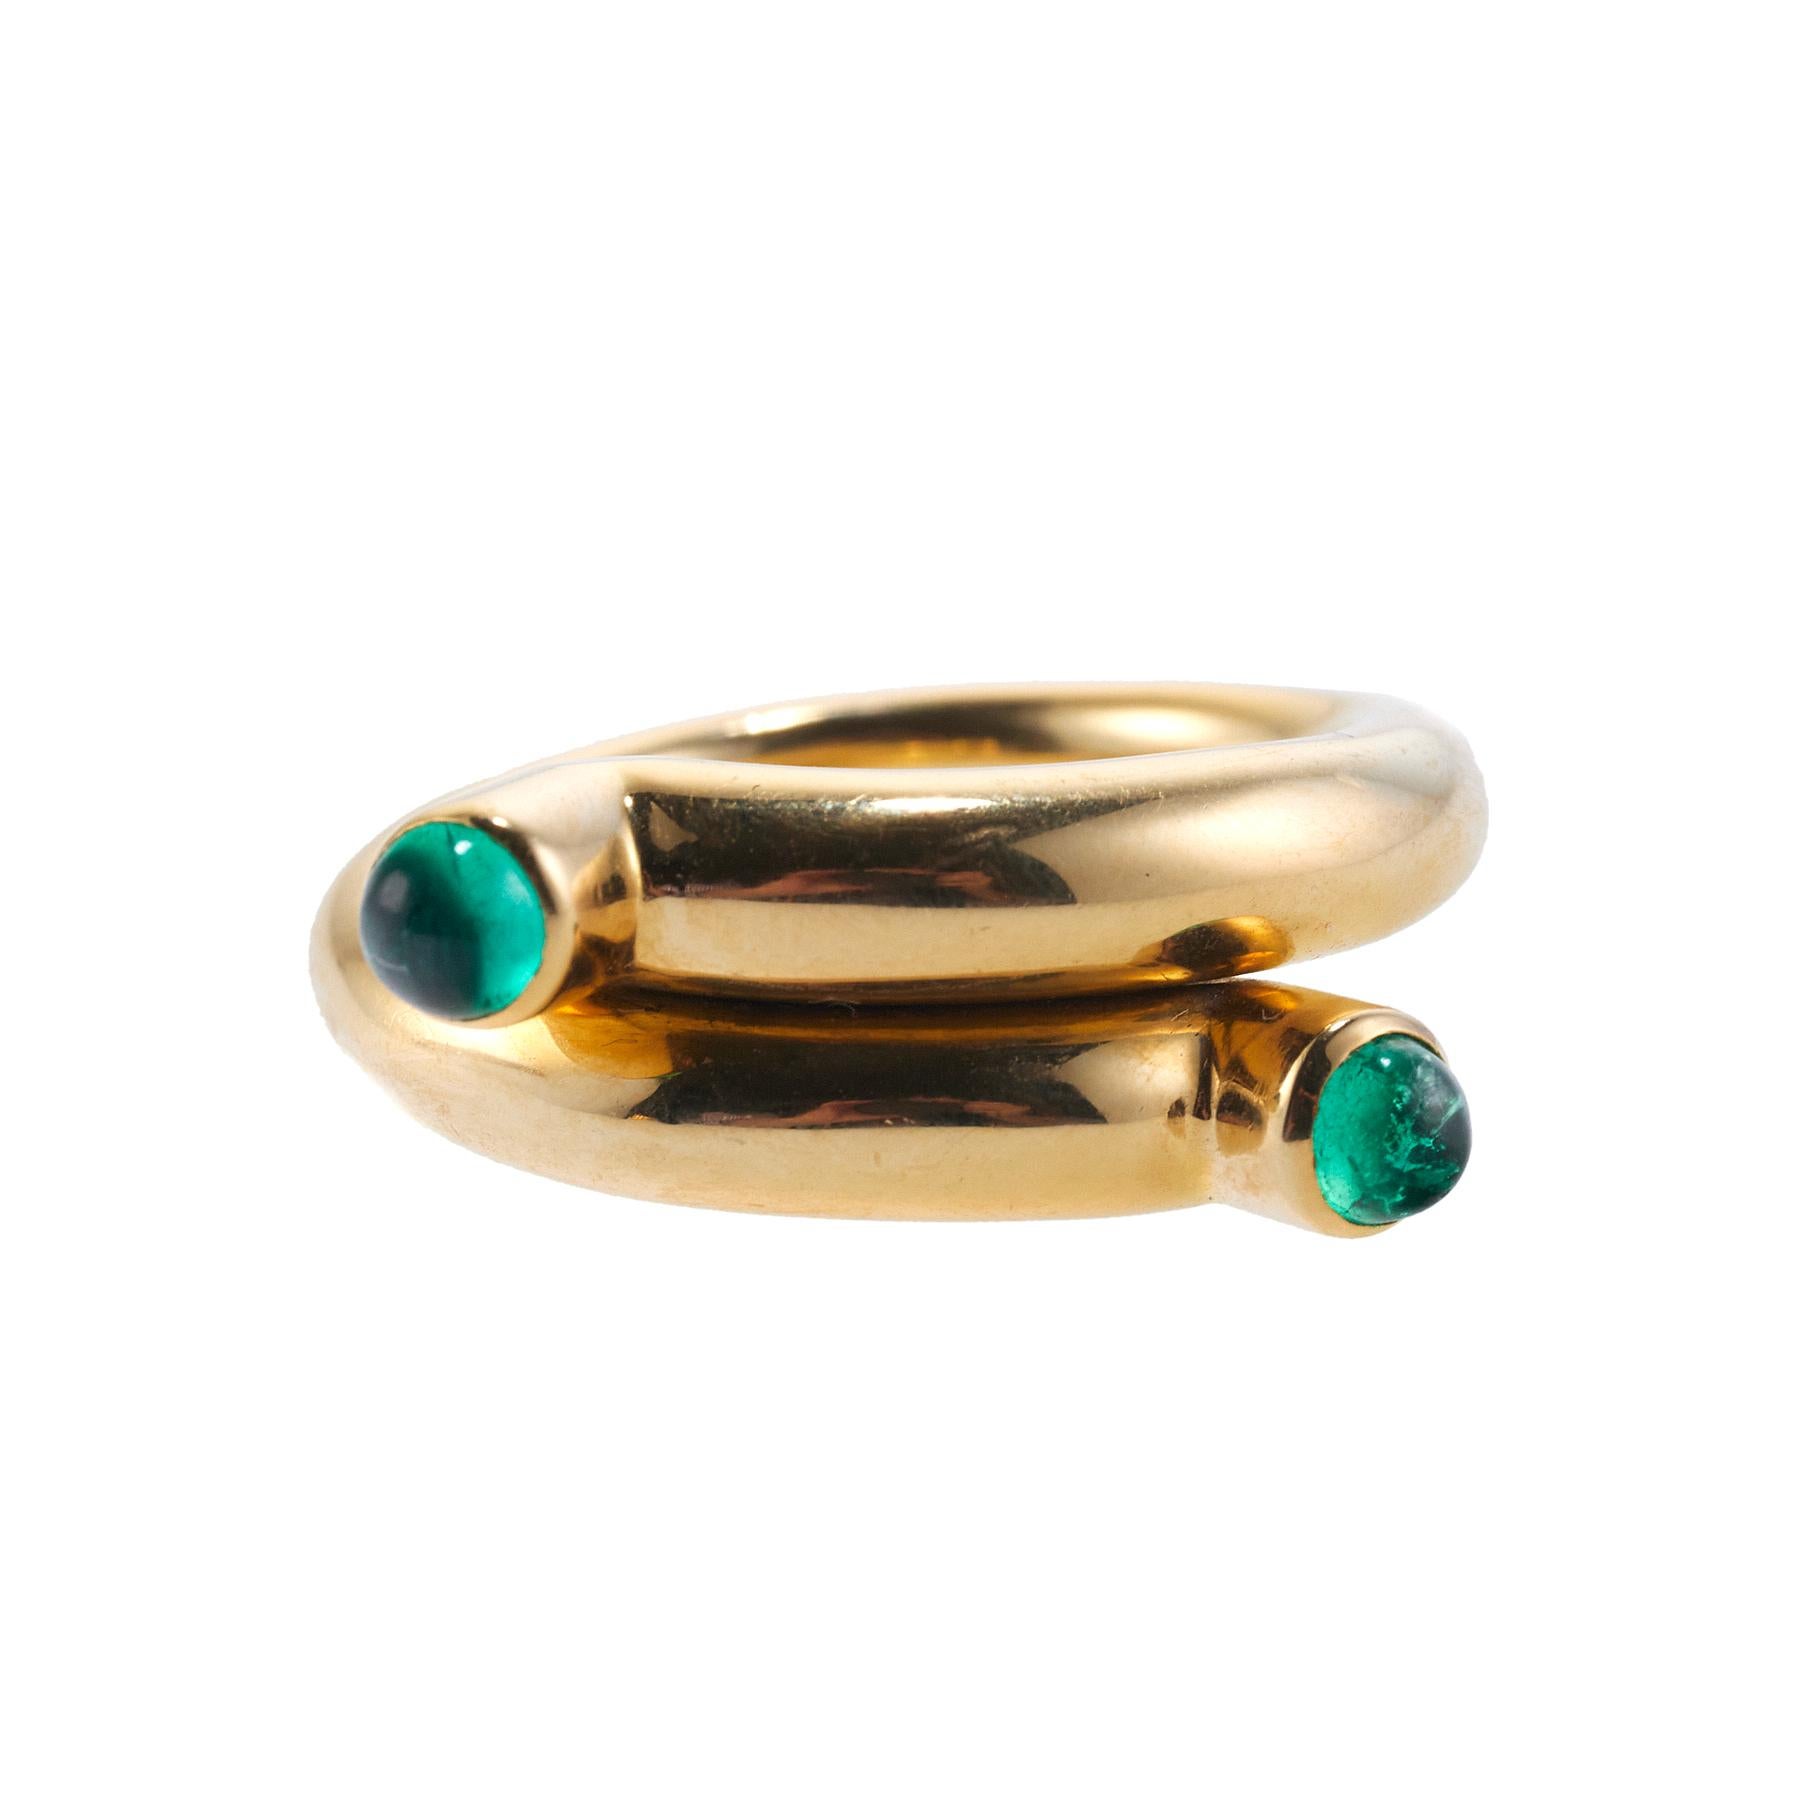 18k gold bypass ring by Jean Schlumberger for Tiffany & Co, with two emeralds. Ring size 7 and it measures 9mm wide. Marked: Tiffany & Co, Schlumberger, 750. Weight is 16 grams.